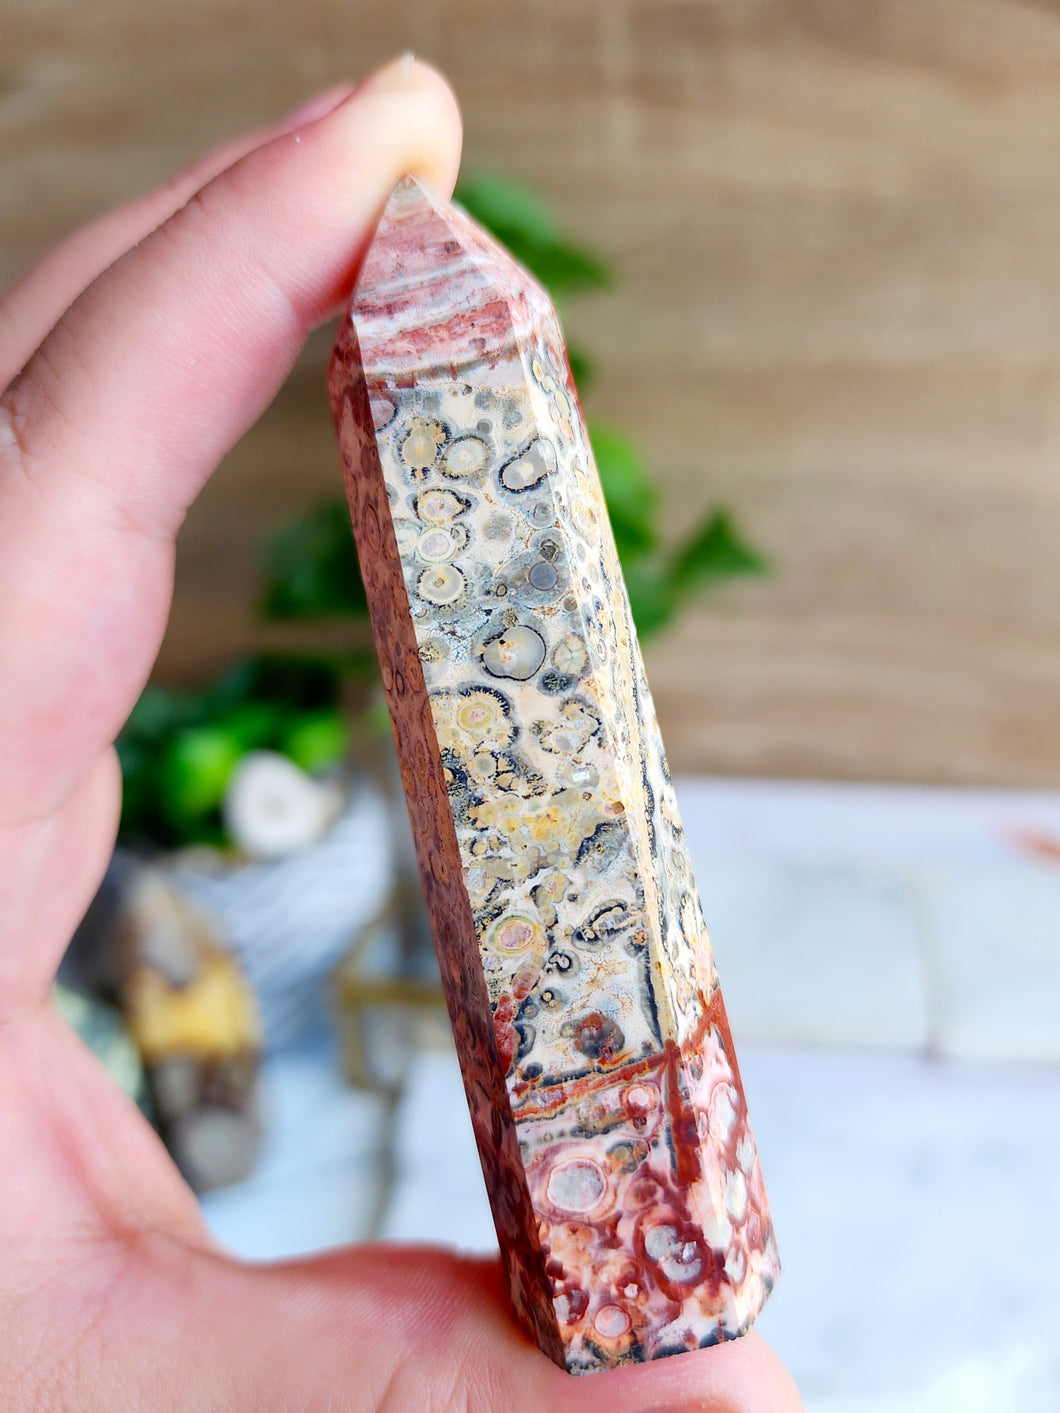  Discover Leopard Skin Jasper, a stone rooted in Earth's energy, igniting sensuality and confidence. Its captivating patterns promote stability and inner strength, deepening your connection to nature. Embrace its transformative power, radiating assurance as you navigate life's journey